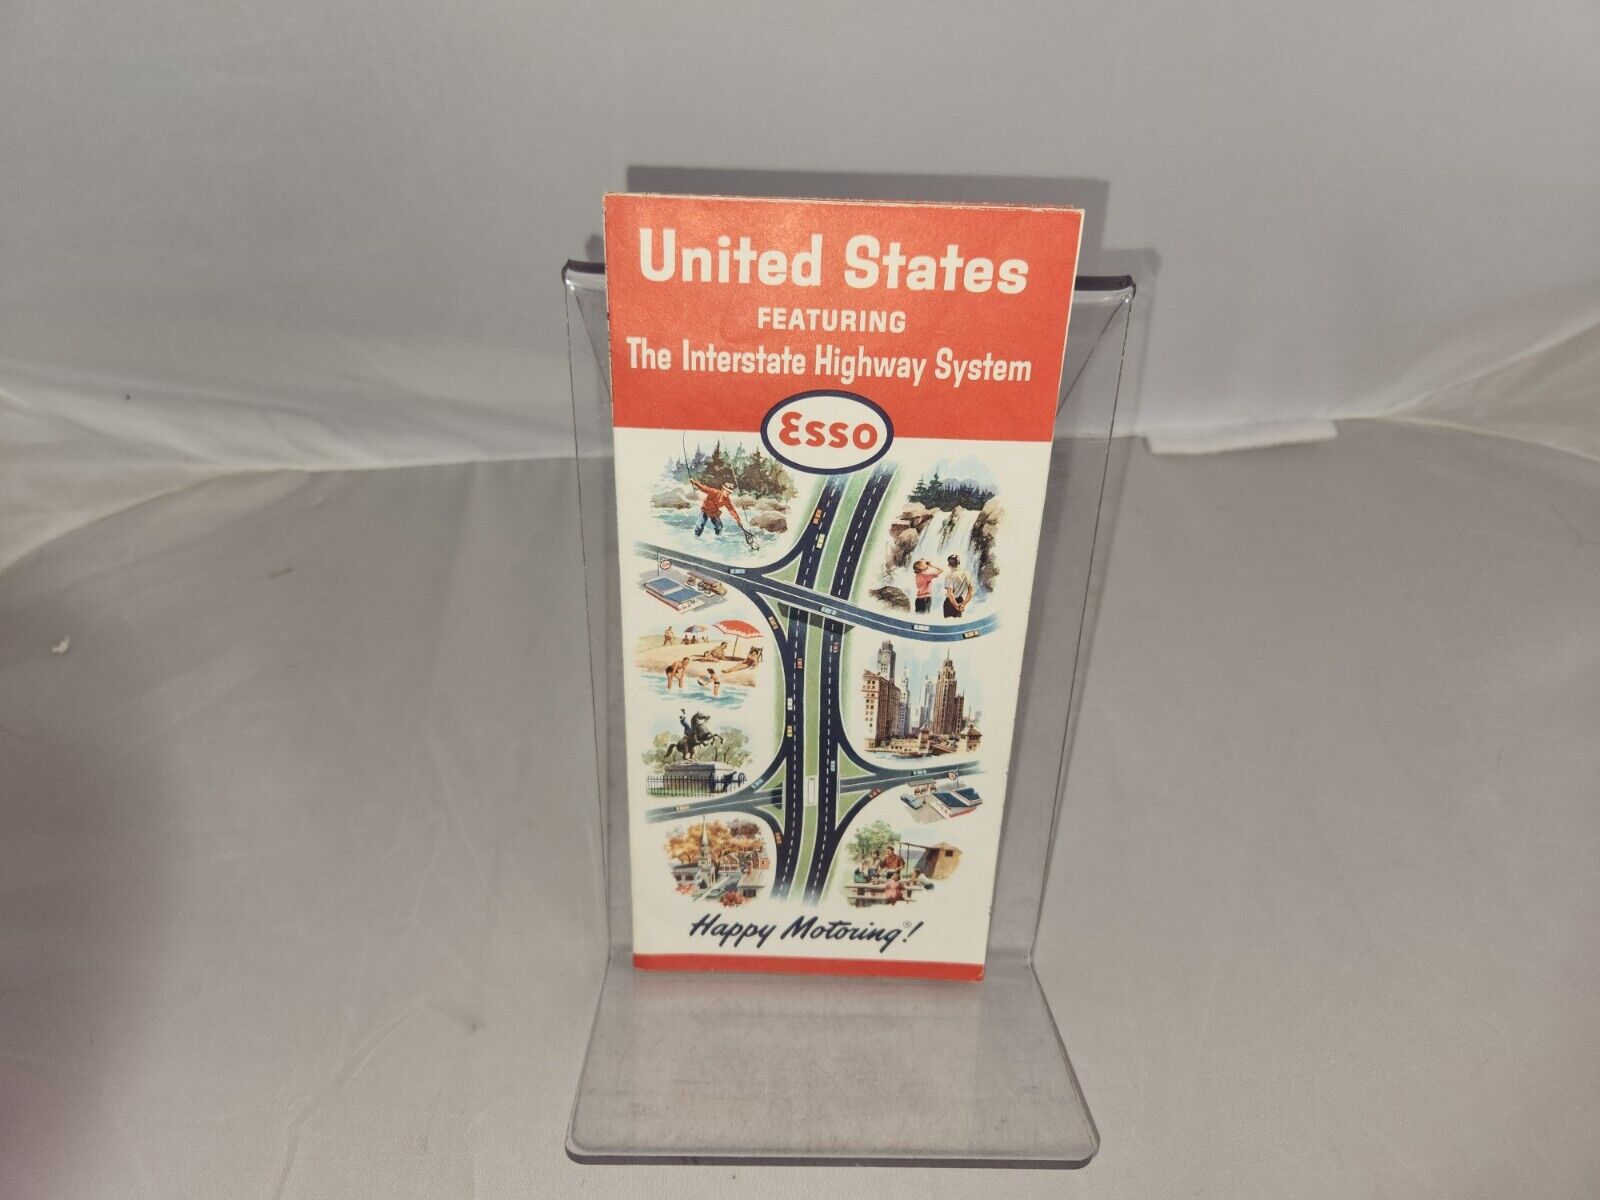 Esso - 1964 United States Interstate Highway System Map - Humble Oil ESSO